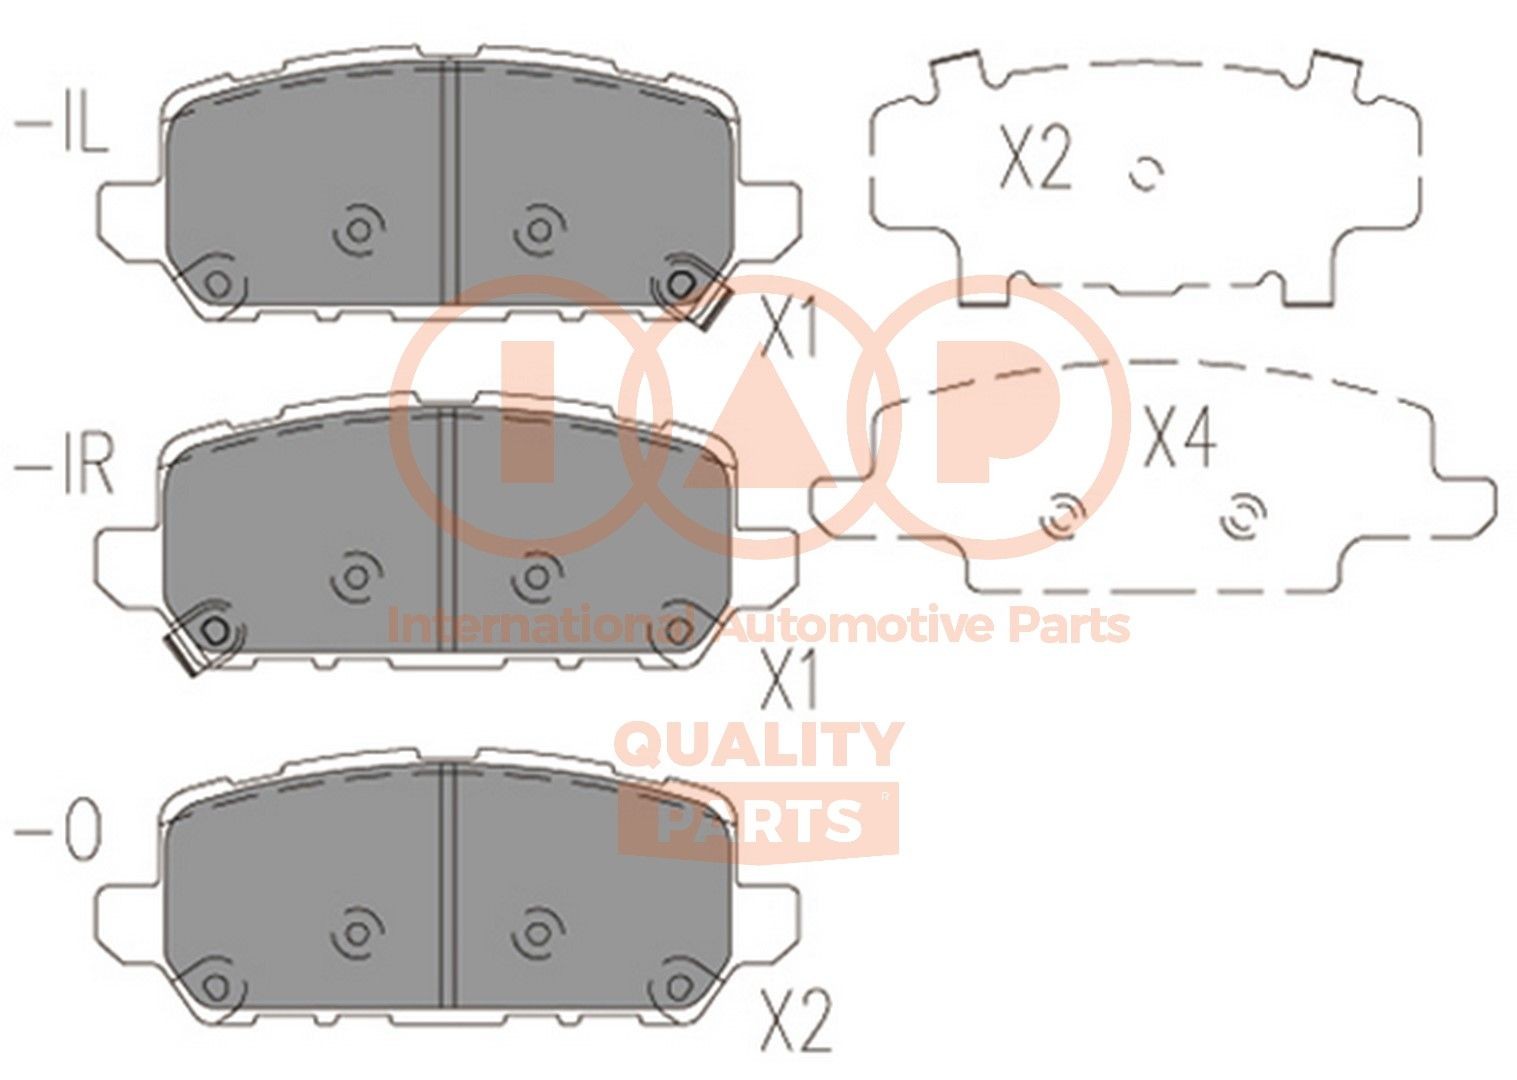 IAP QUALITY PARTS Rear Axle Height 1: 45,8mm, Width 1: 116,6mm, Thickness 1: 16mm Brake pads 704-06071 buy